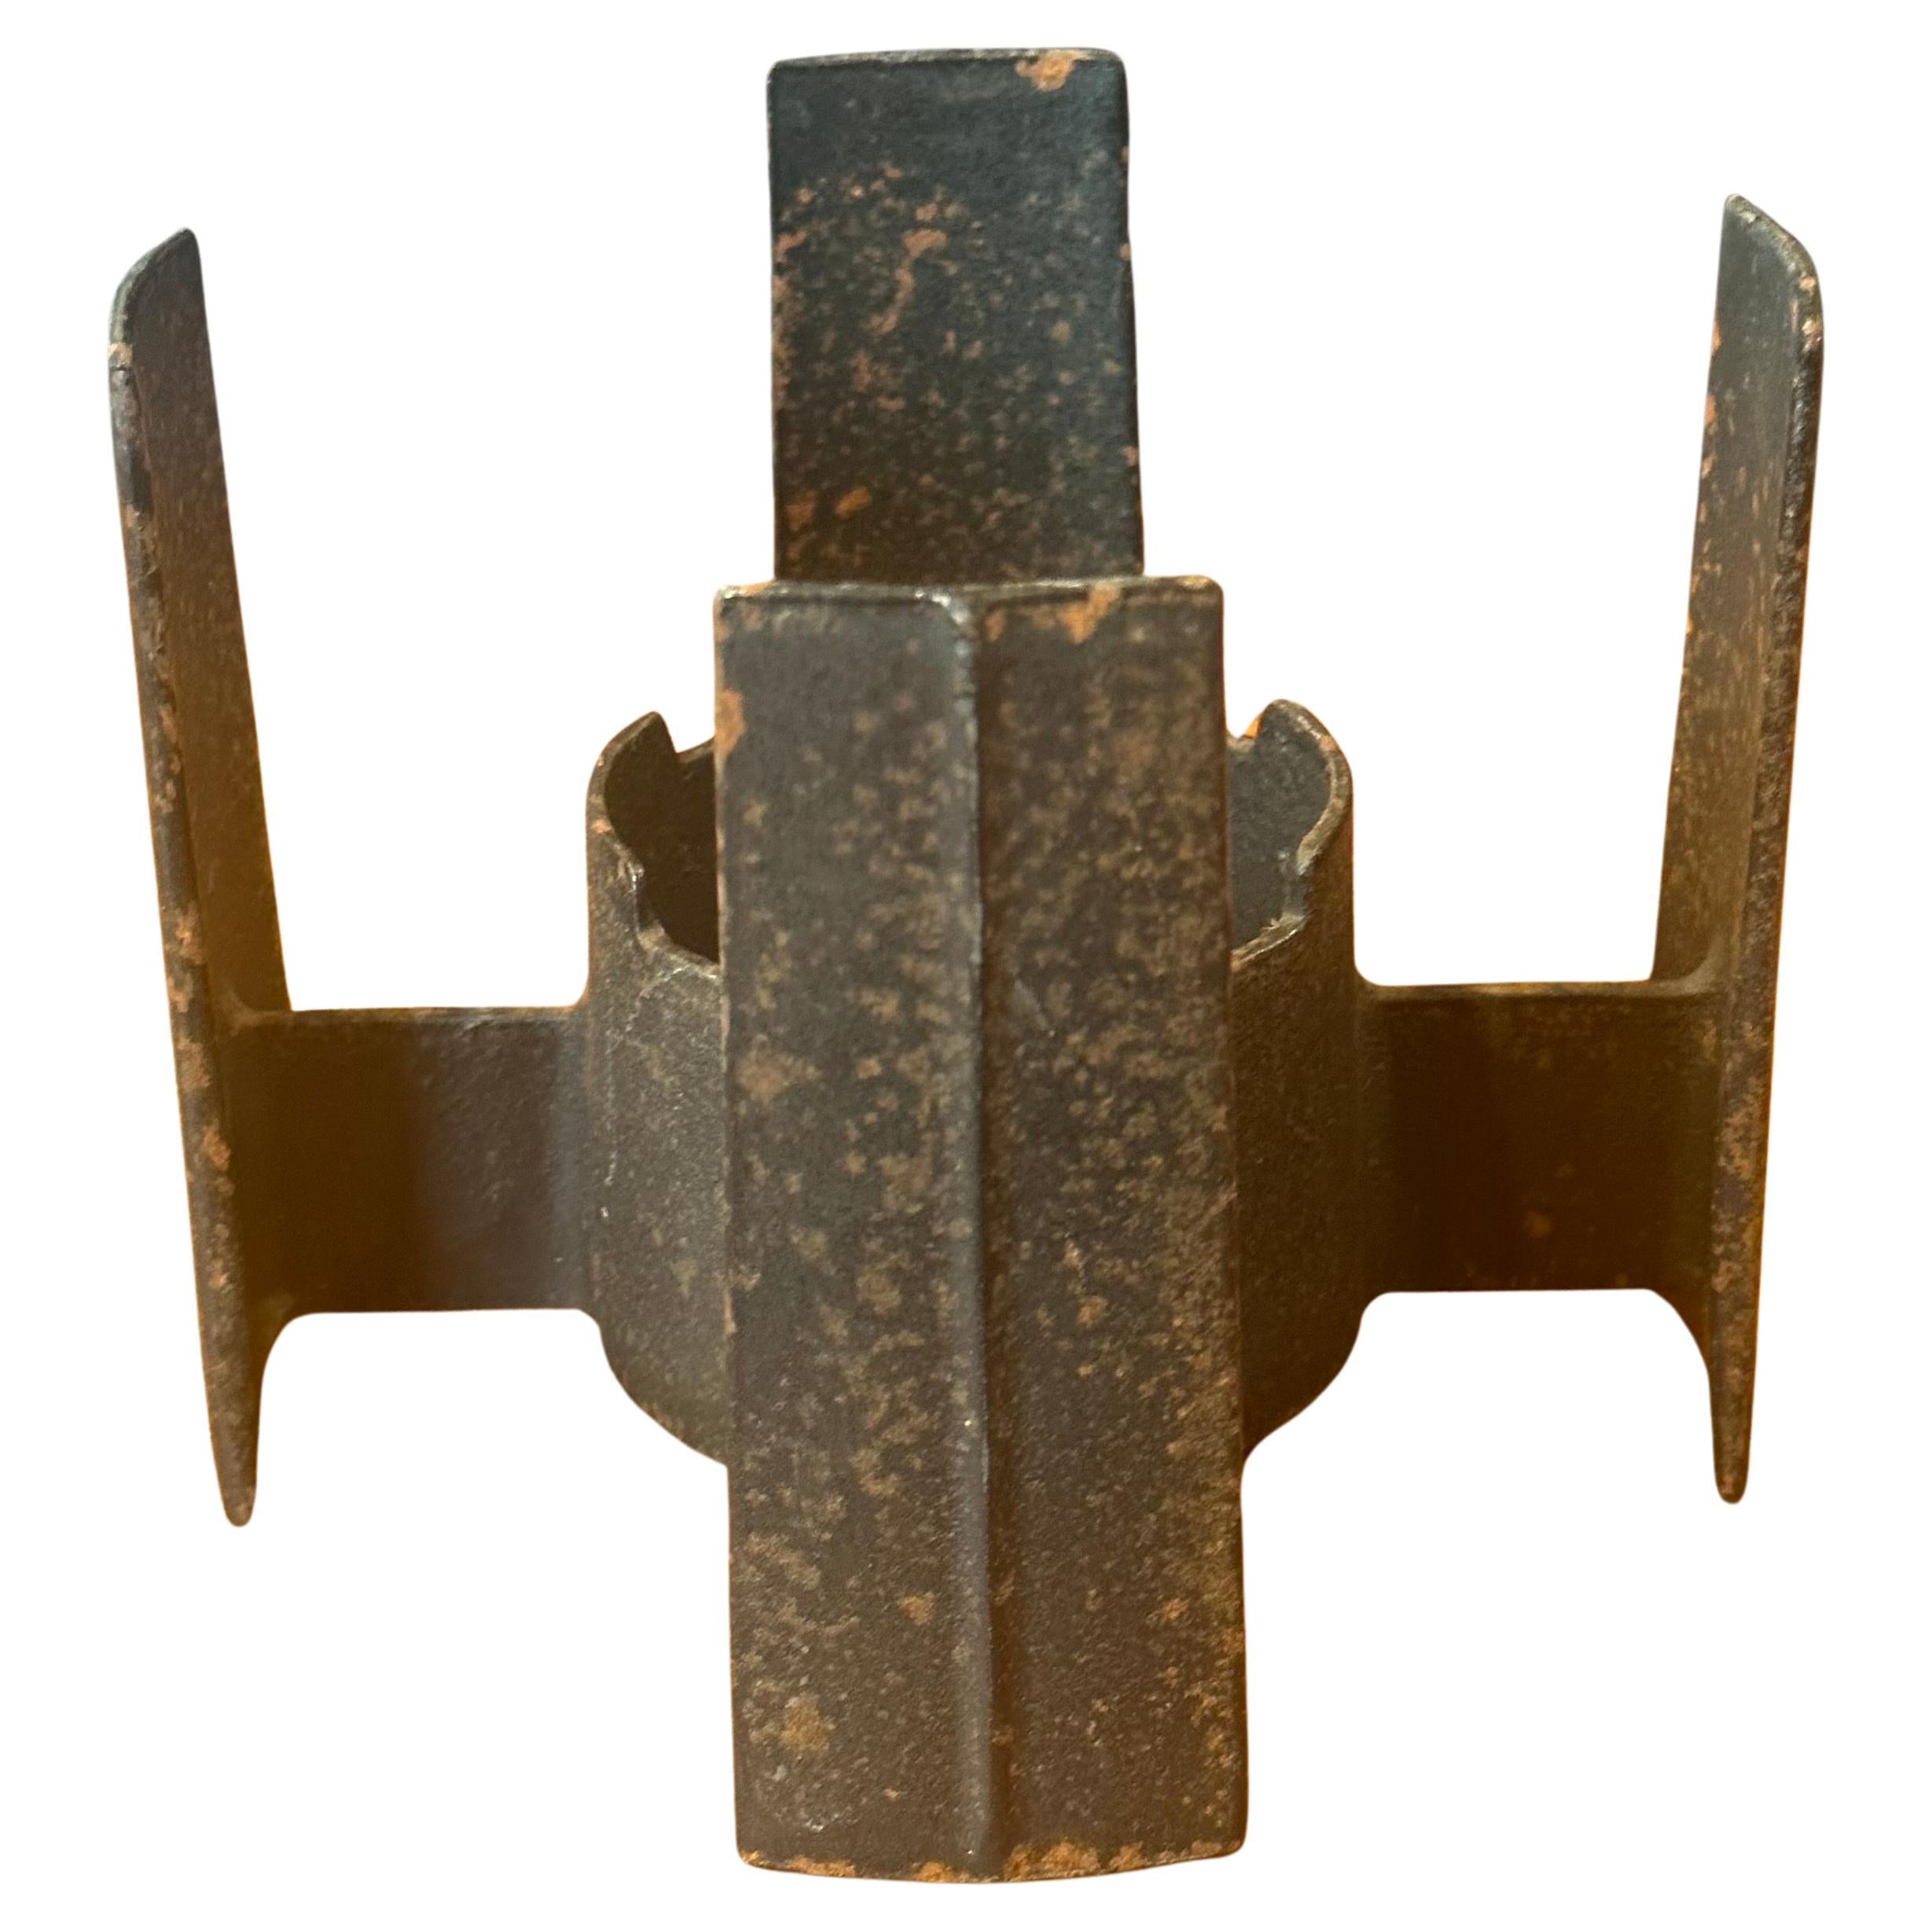 Vintage MCM iron candle holder by Dansk, circa 1960s.  This is a rare form has a great patina and measures 6